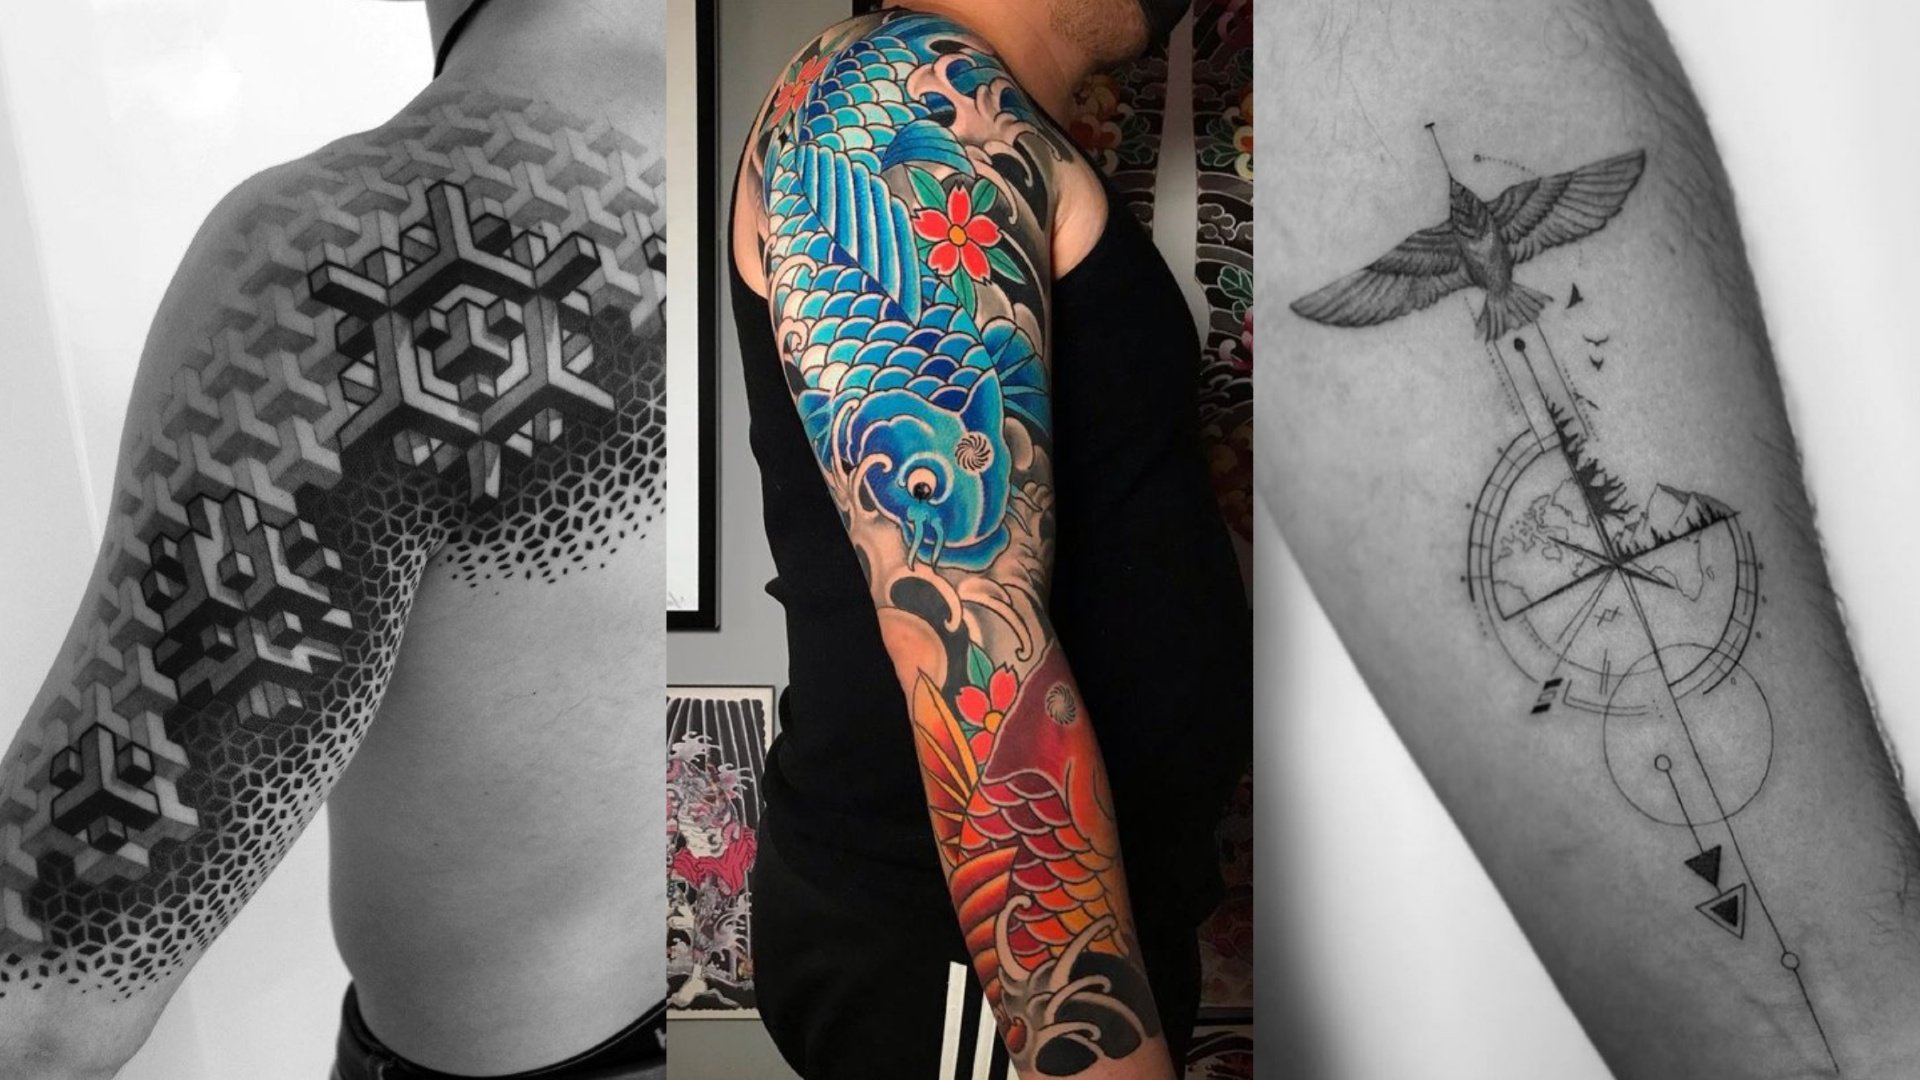 Technicolor Tattoos Mix Psychedelic Graphics with Memphis-Inspired Patterns  — Colossal